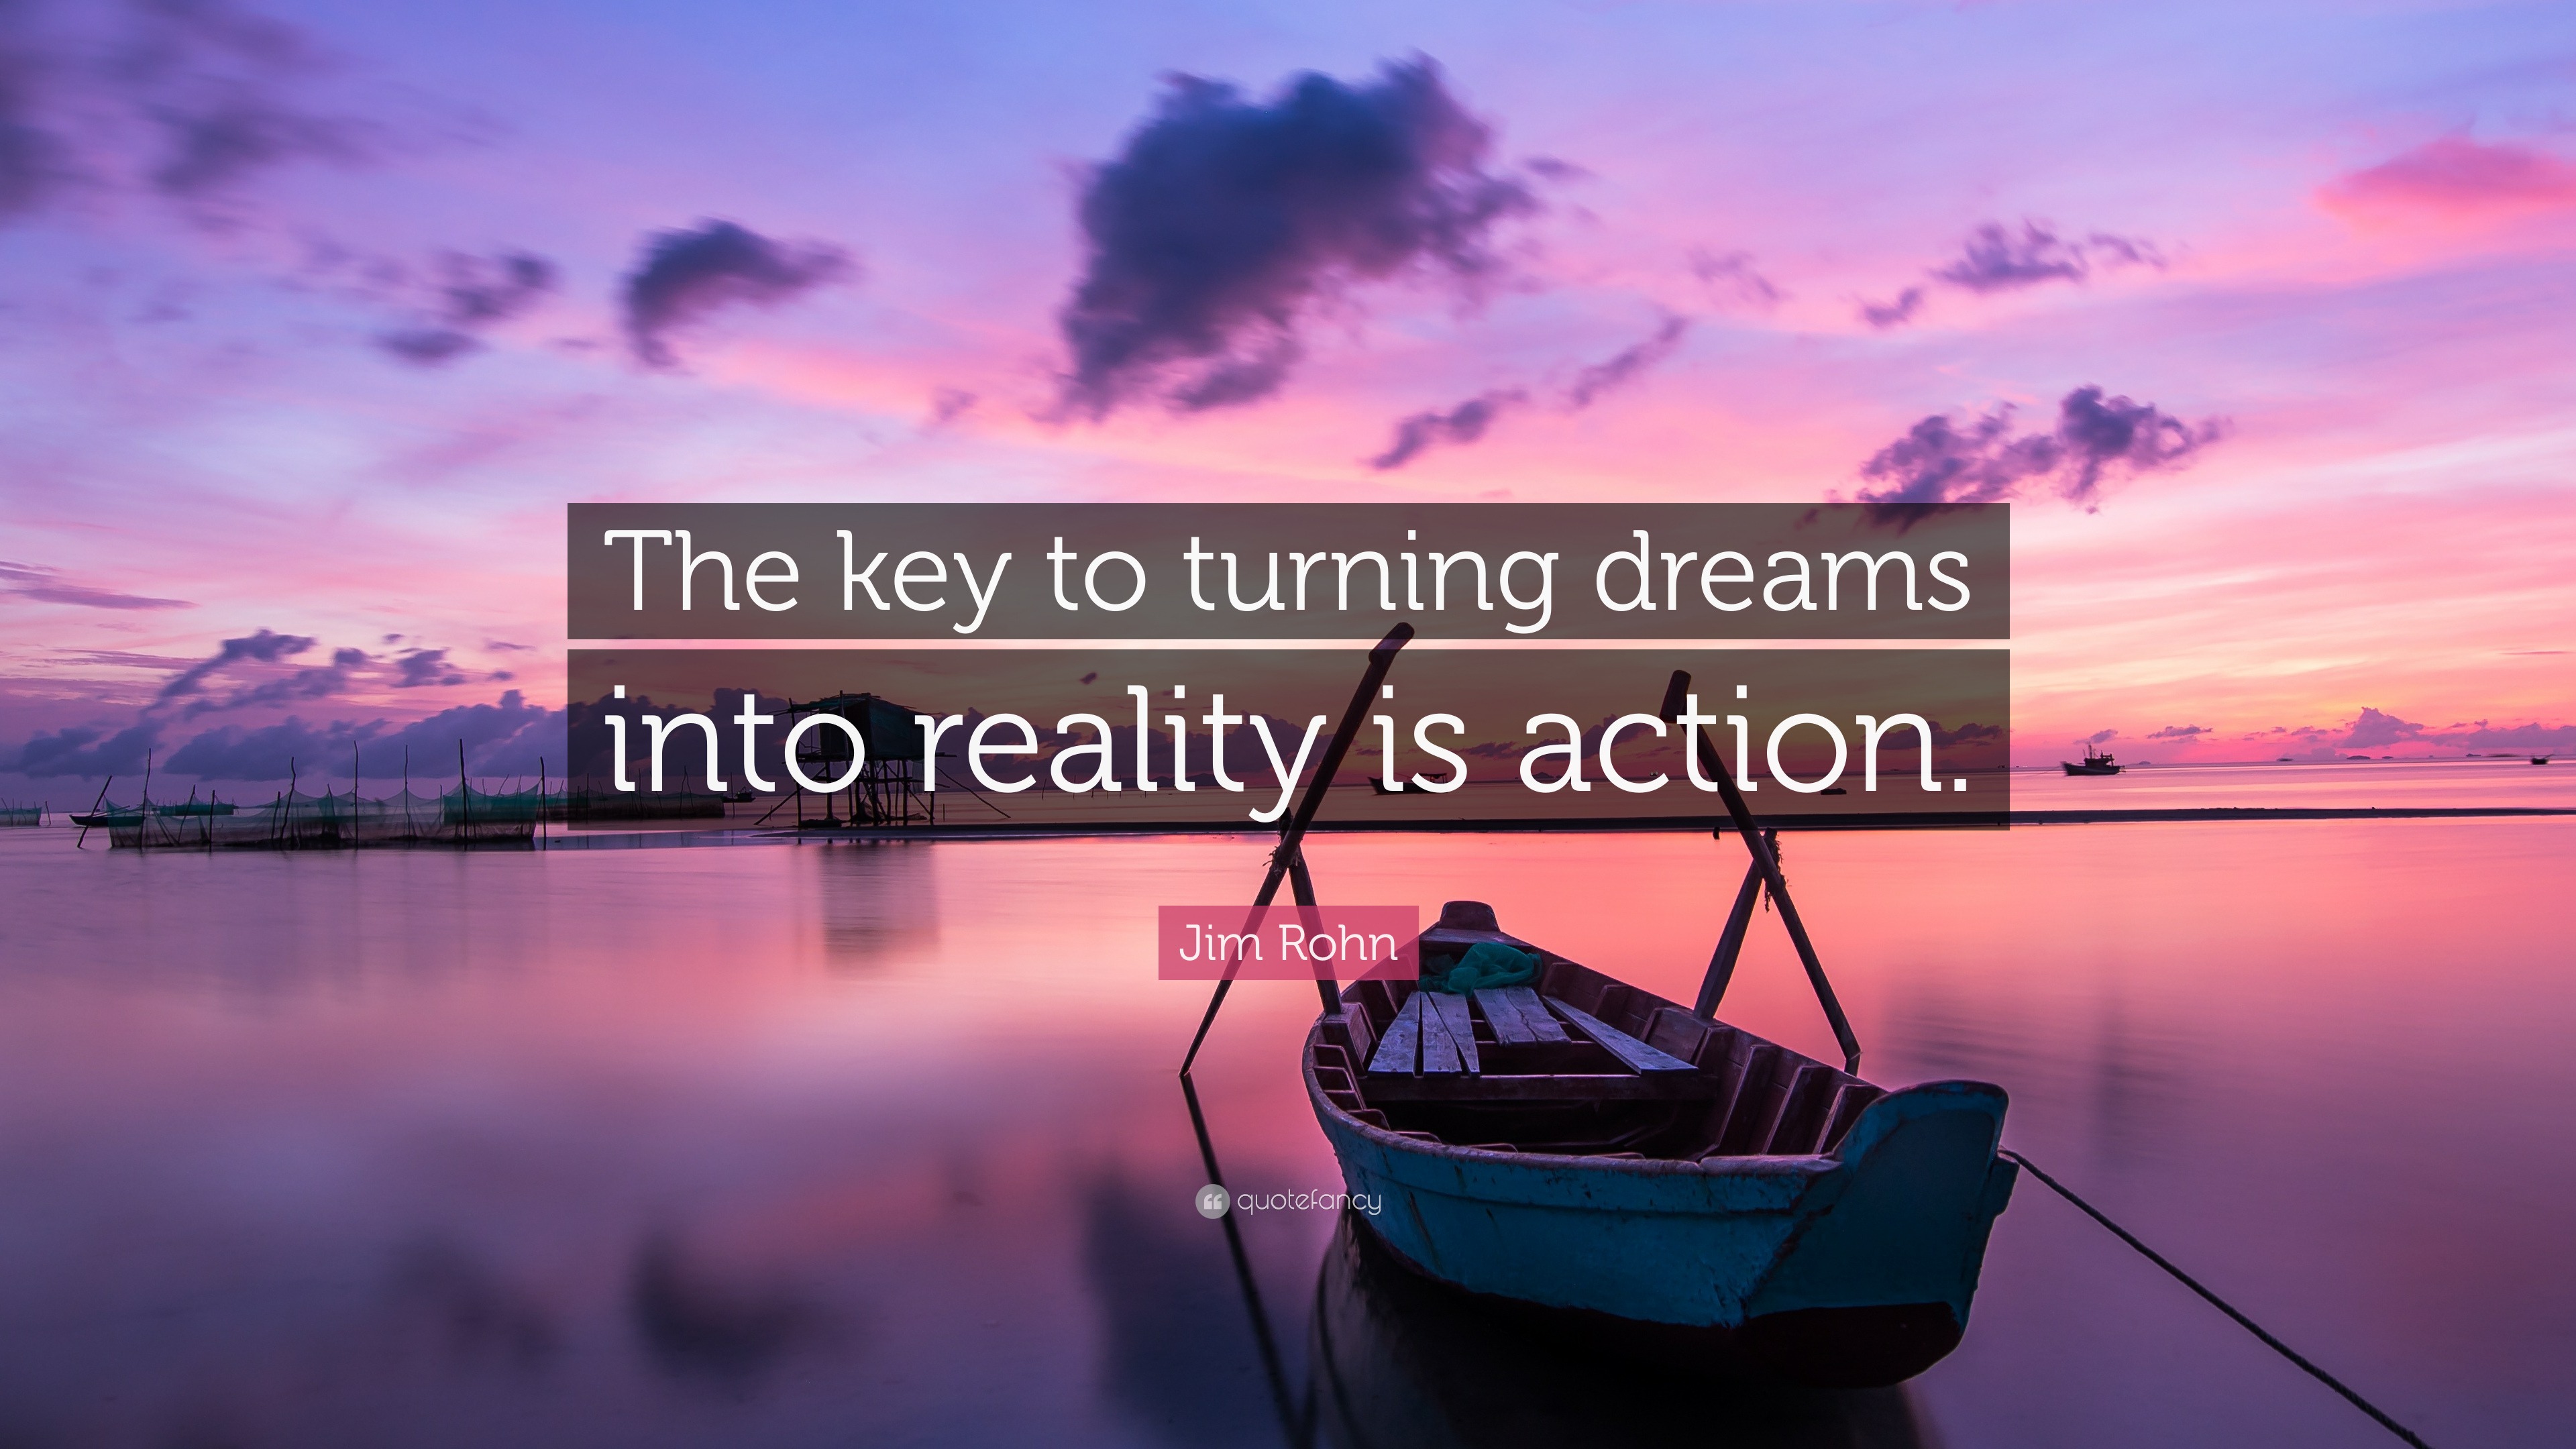 Jim Rohn Quote “the Key To Turning Dreams Into Reality Is Action”